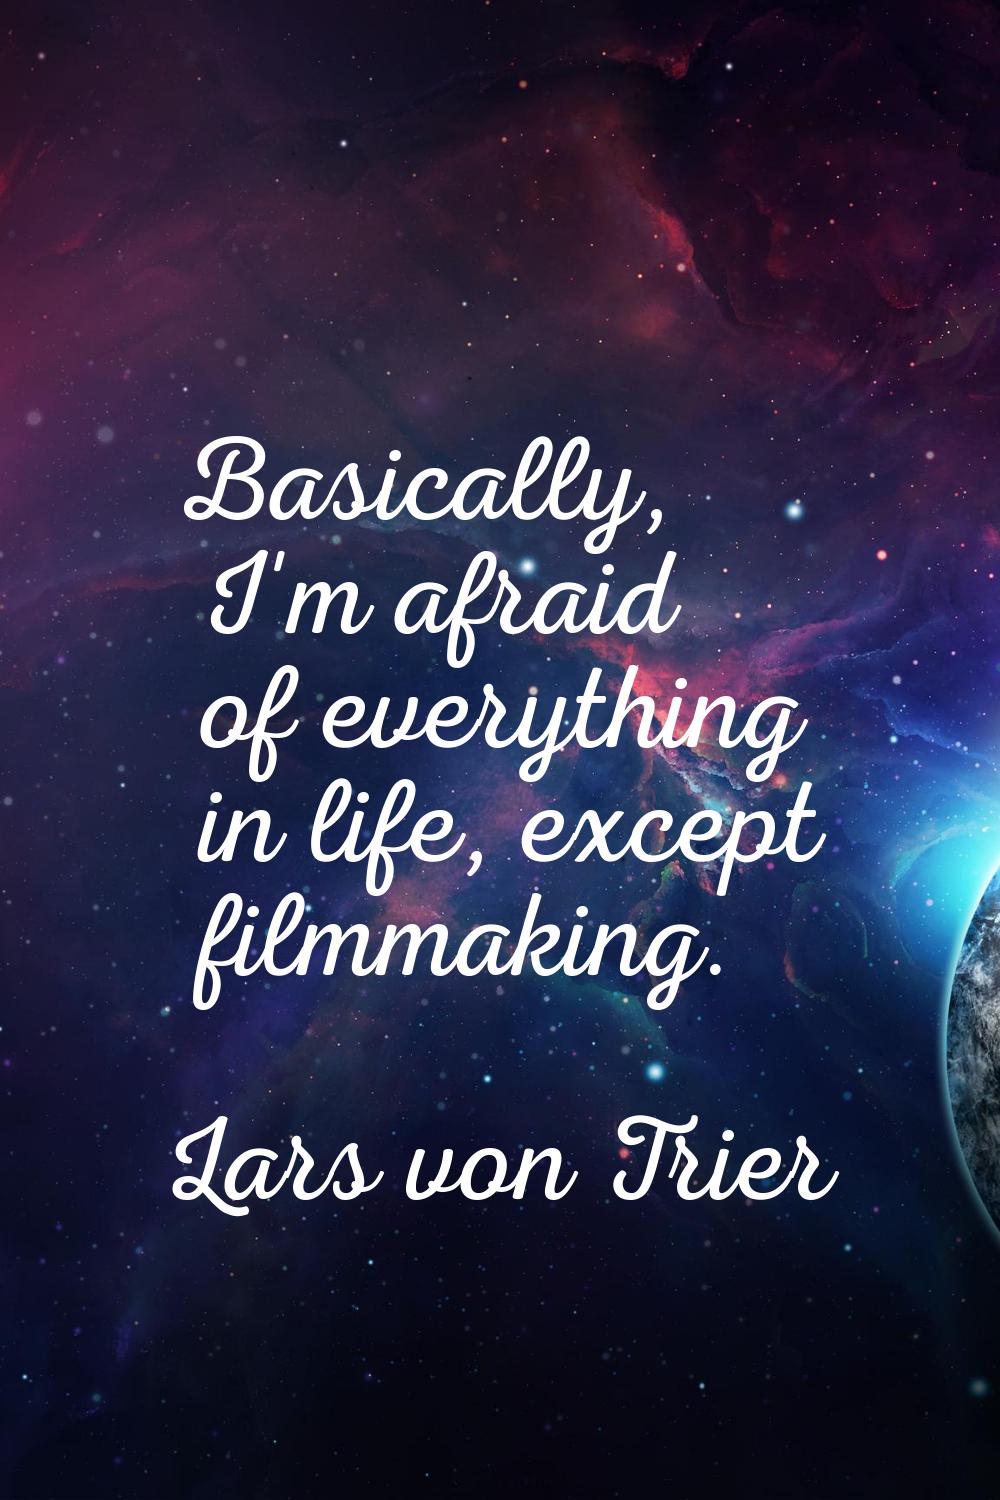 Basically, I'm afraid of everything in life, except filmmaking.